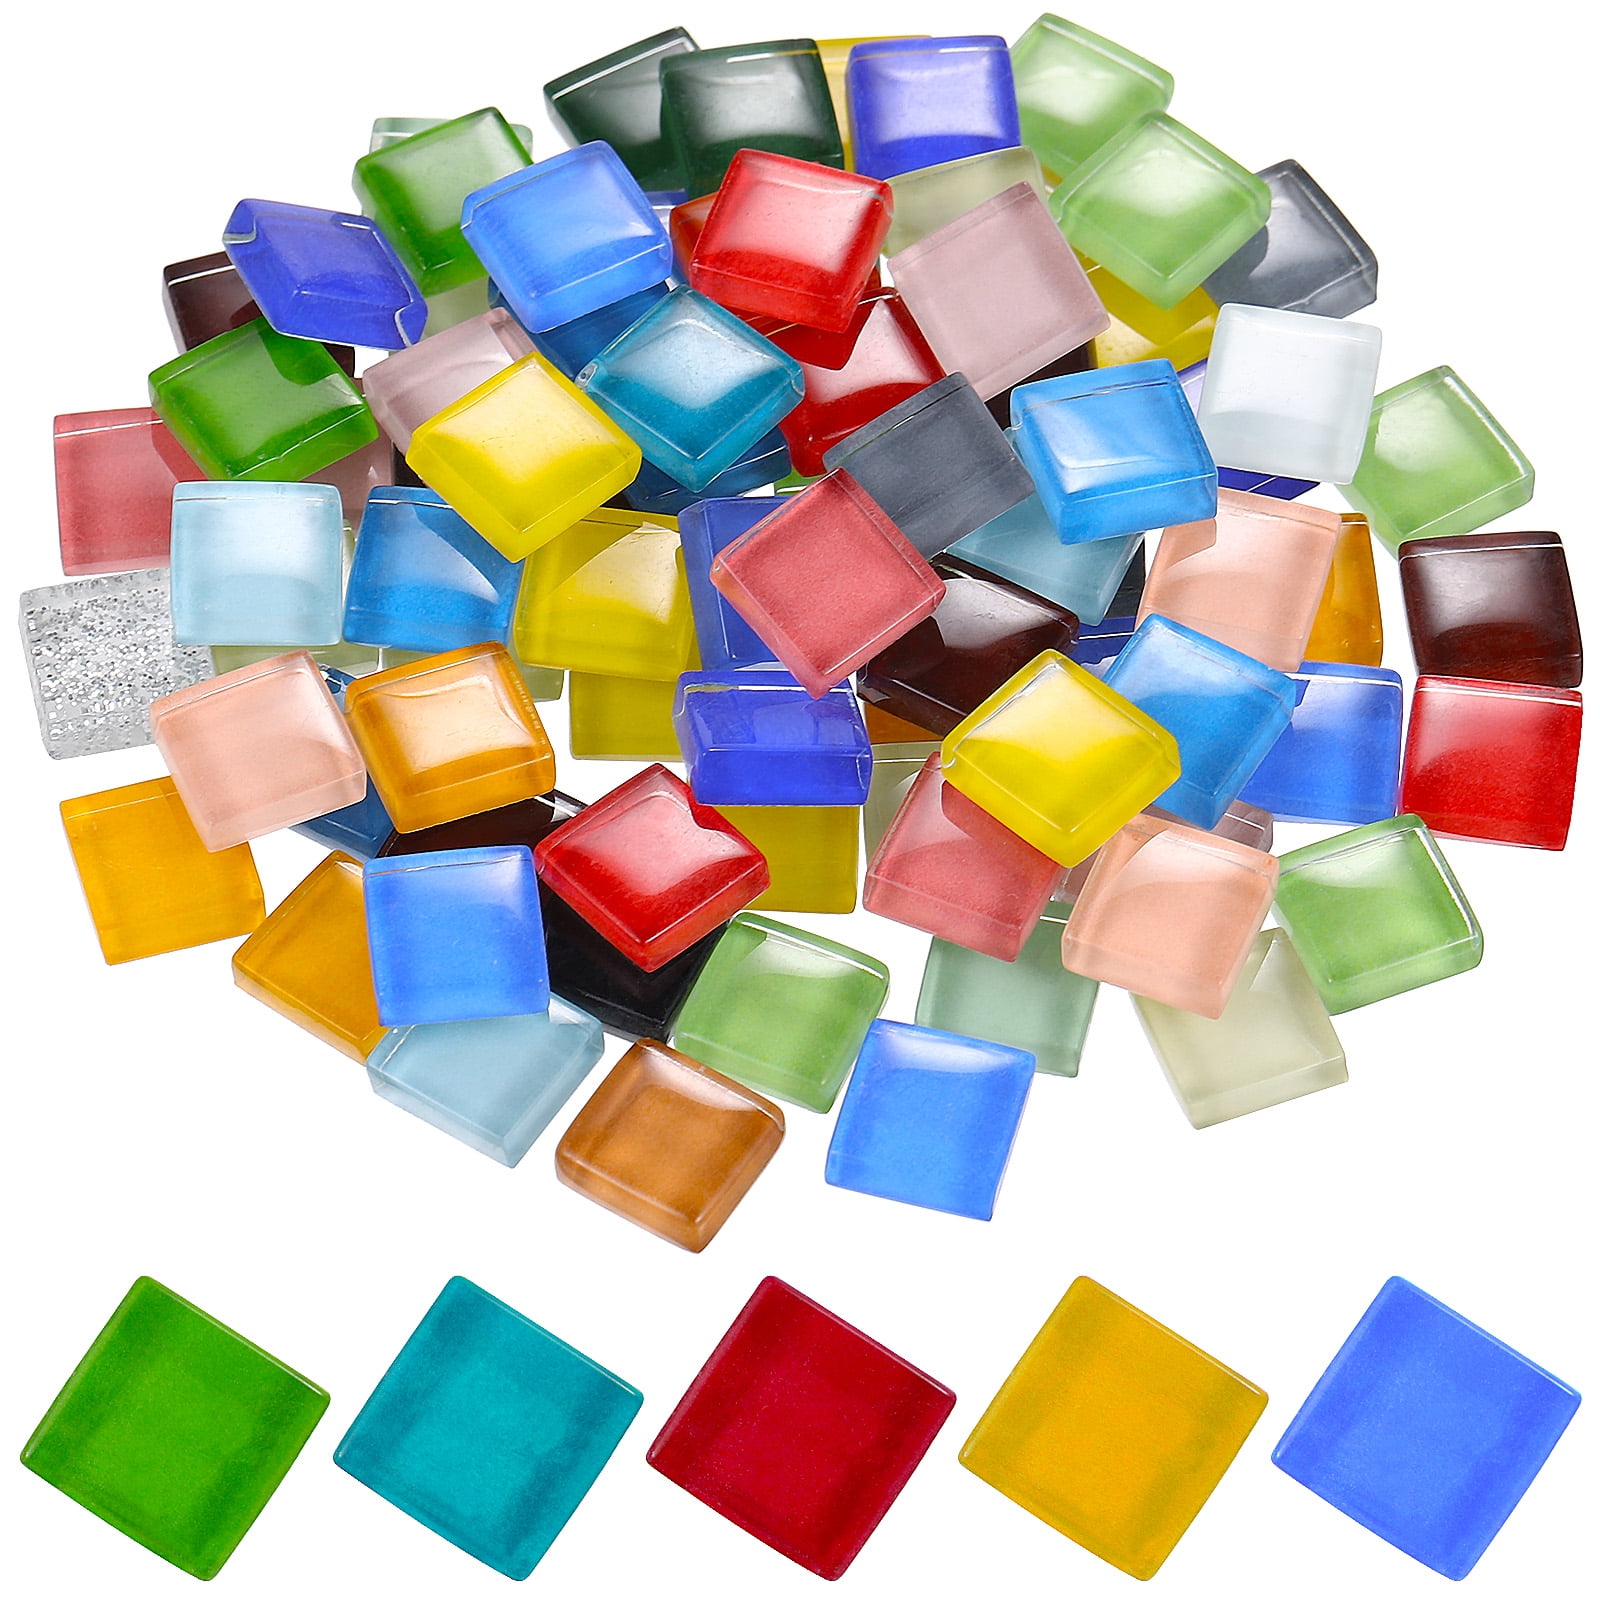 Colorful Square Foam Tiles Hand Cut Mosaic Tiles Kids Craft Supply